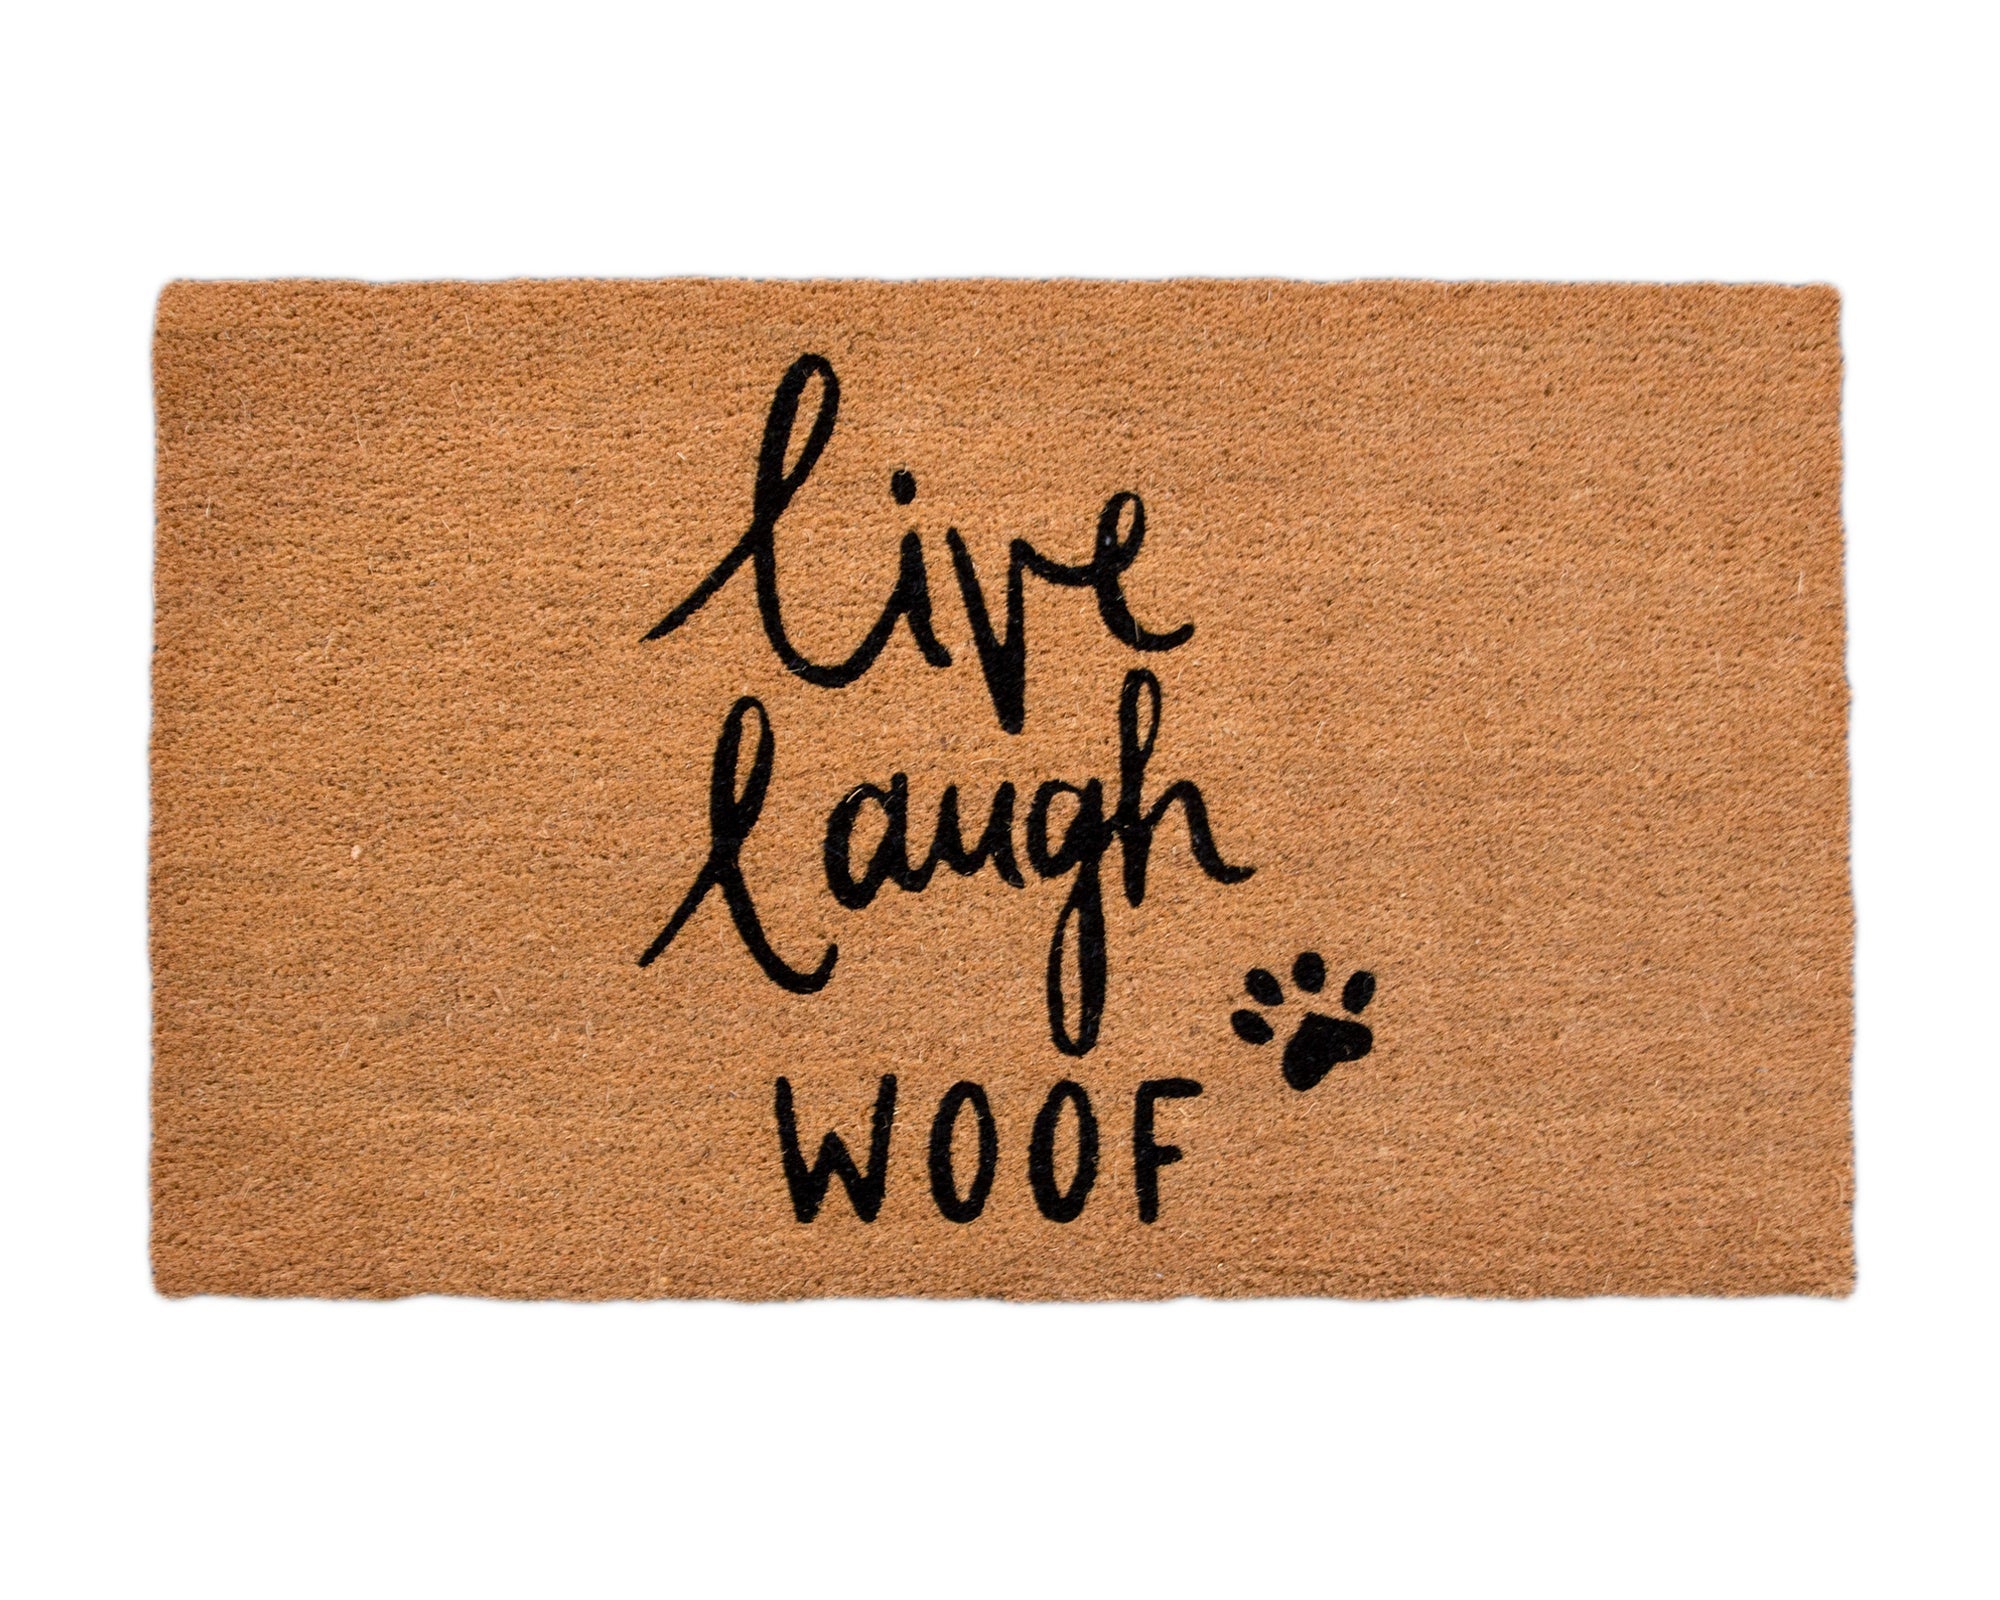 4CatsnDogs- Convertible Entrance Mat " Live, Live, woof"